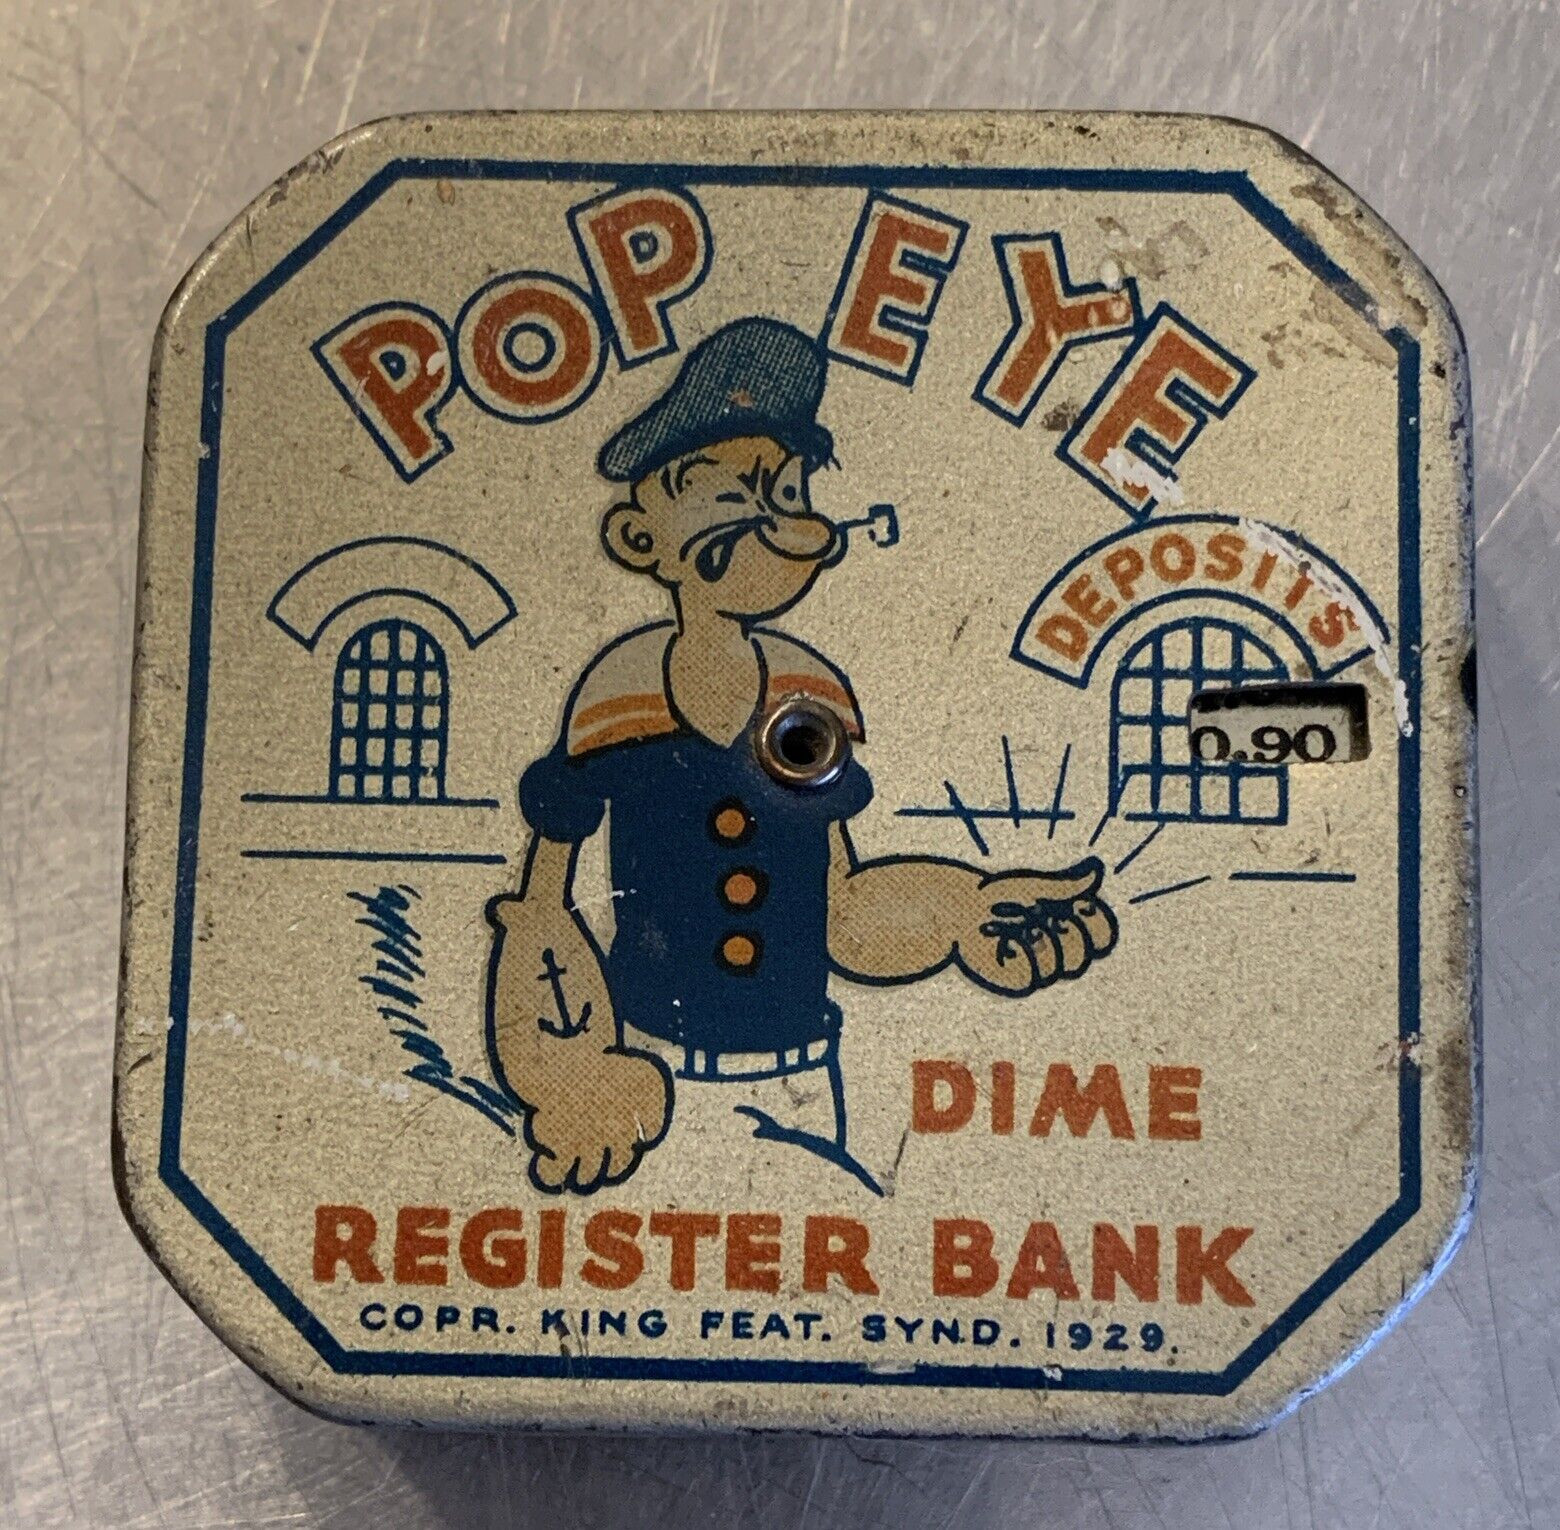 VINTAGE Popeye Dime Register Bank - King Features Syndicate (1929) Silver Litho